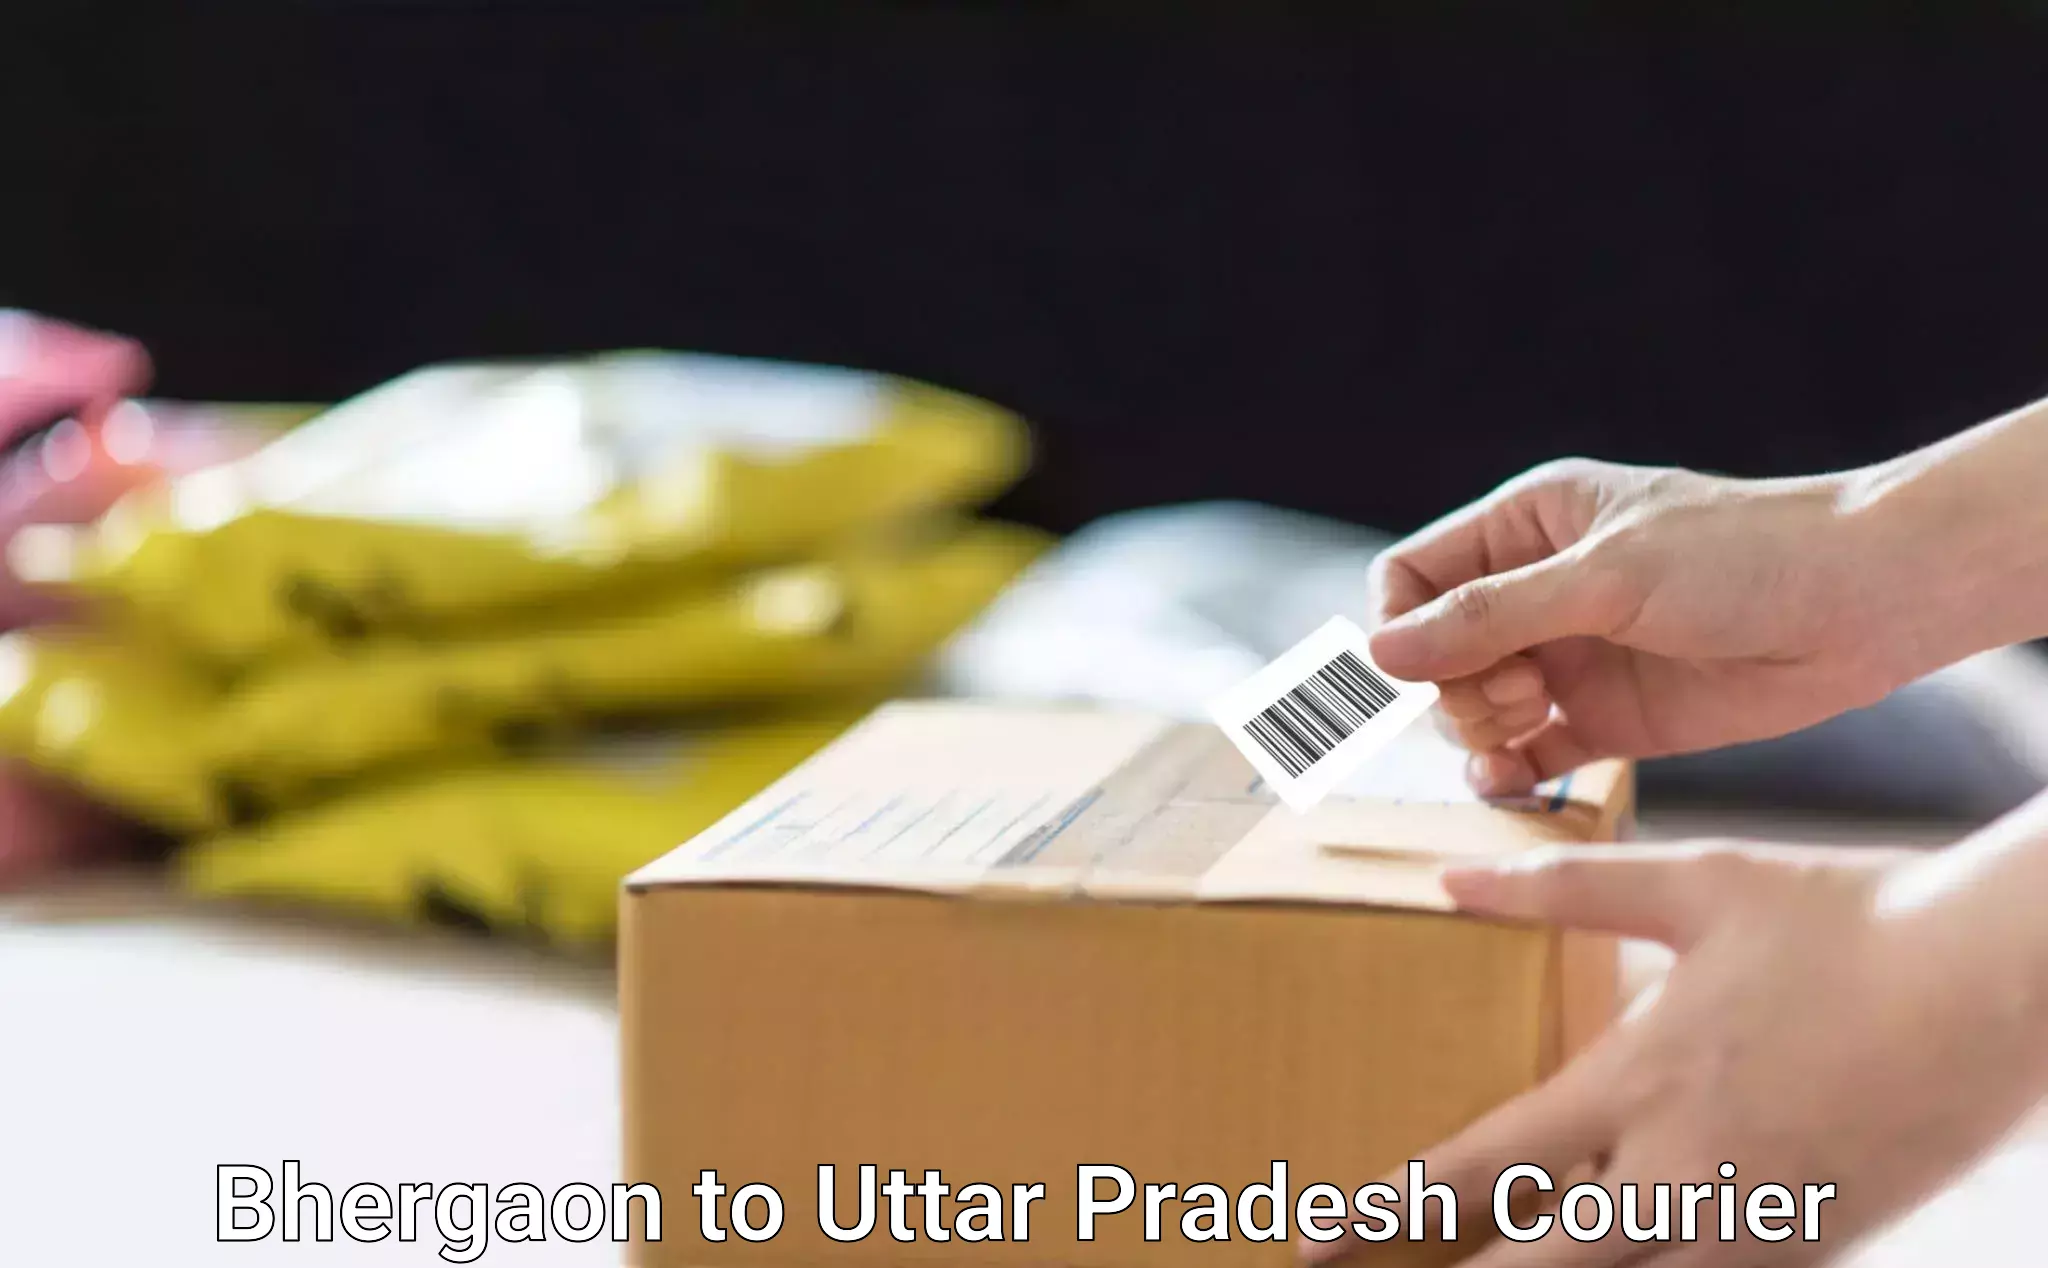 End-to-end delivery in Bhergaon to Uttar Pradesh